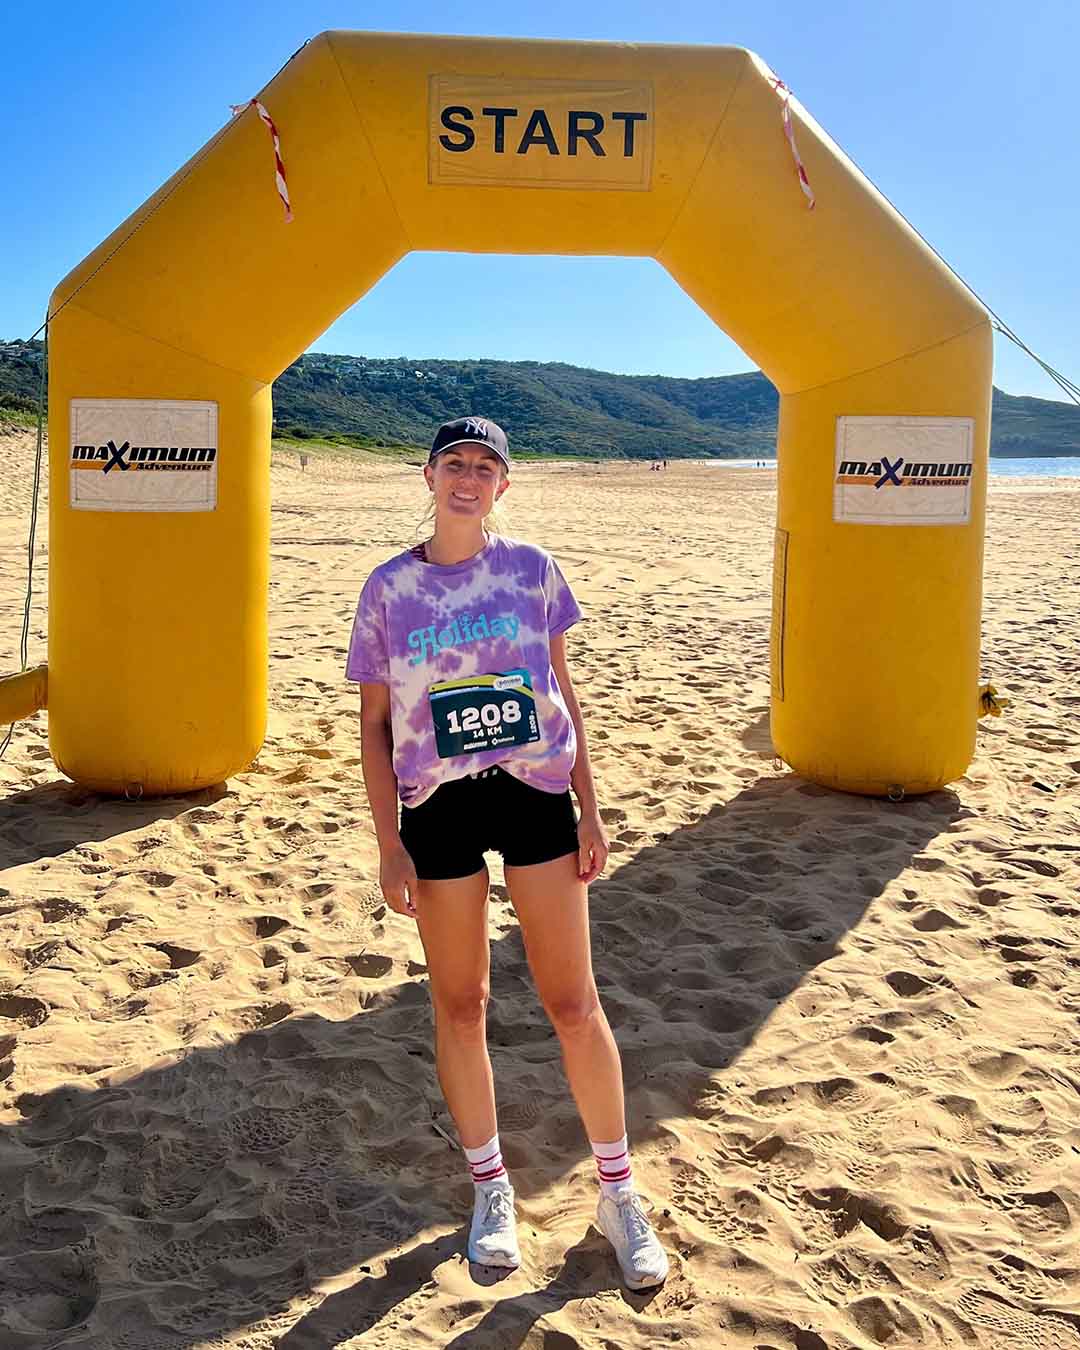 Elise after running a half marathon, standing at the finish line on a beach